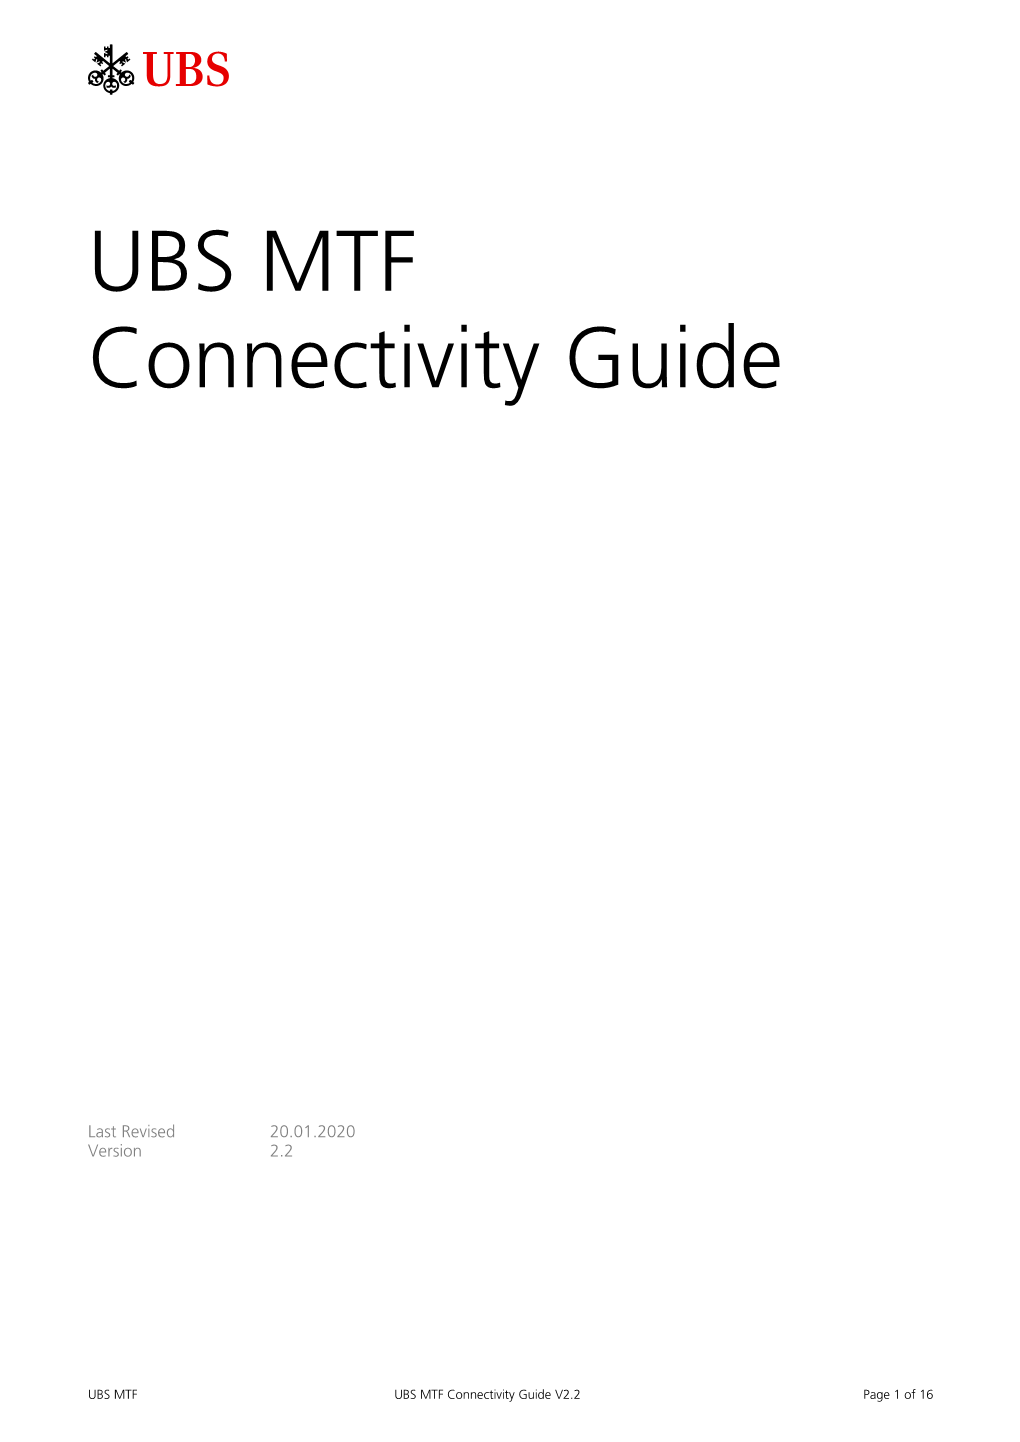 UBS MTF Connectivity Guide